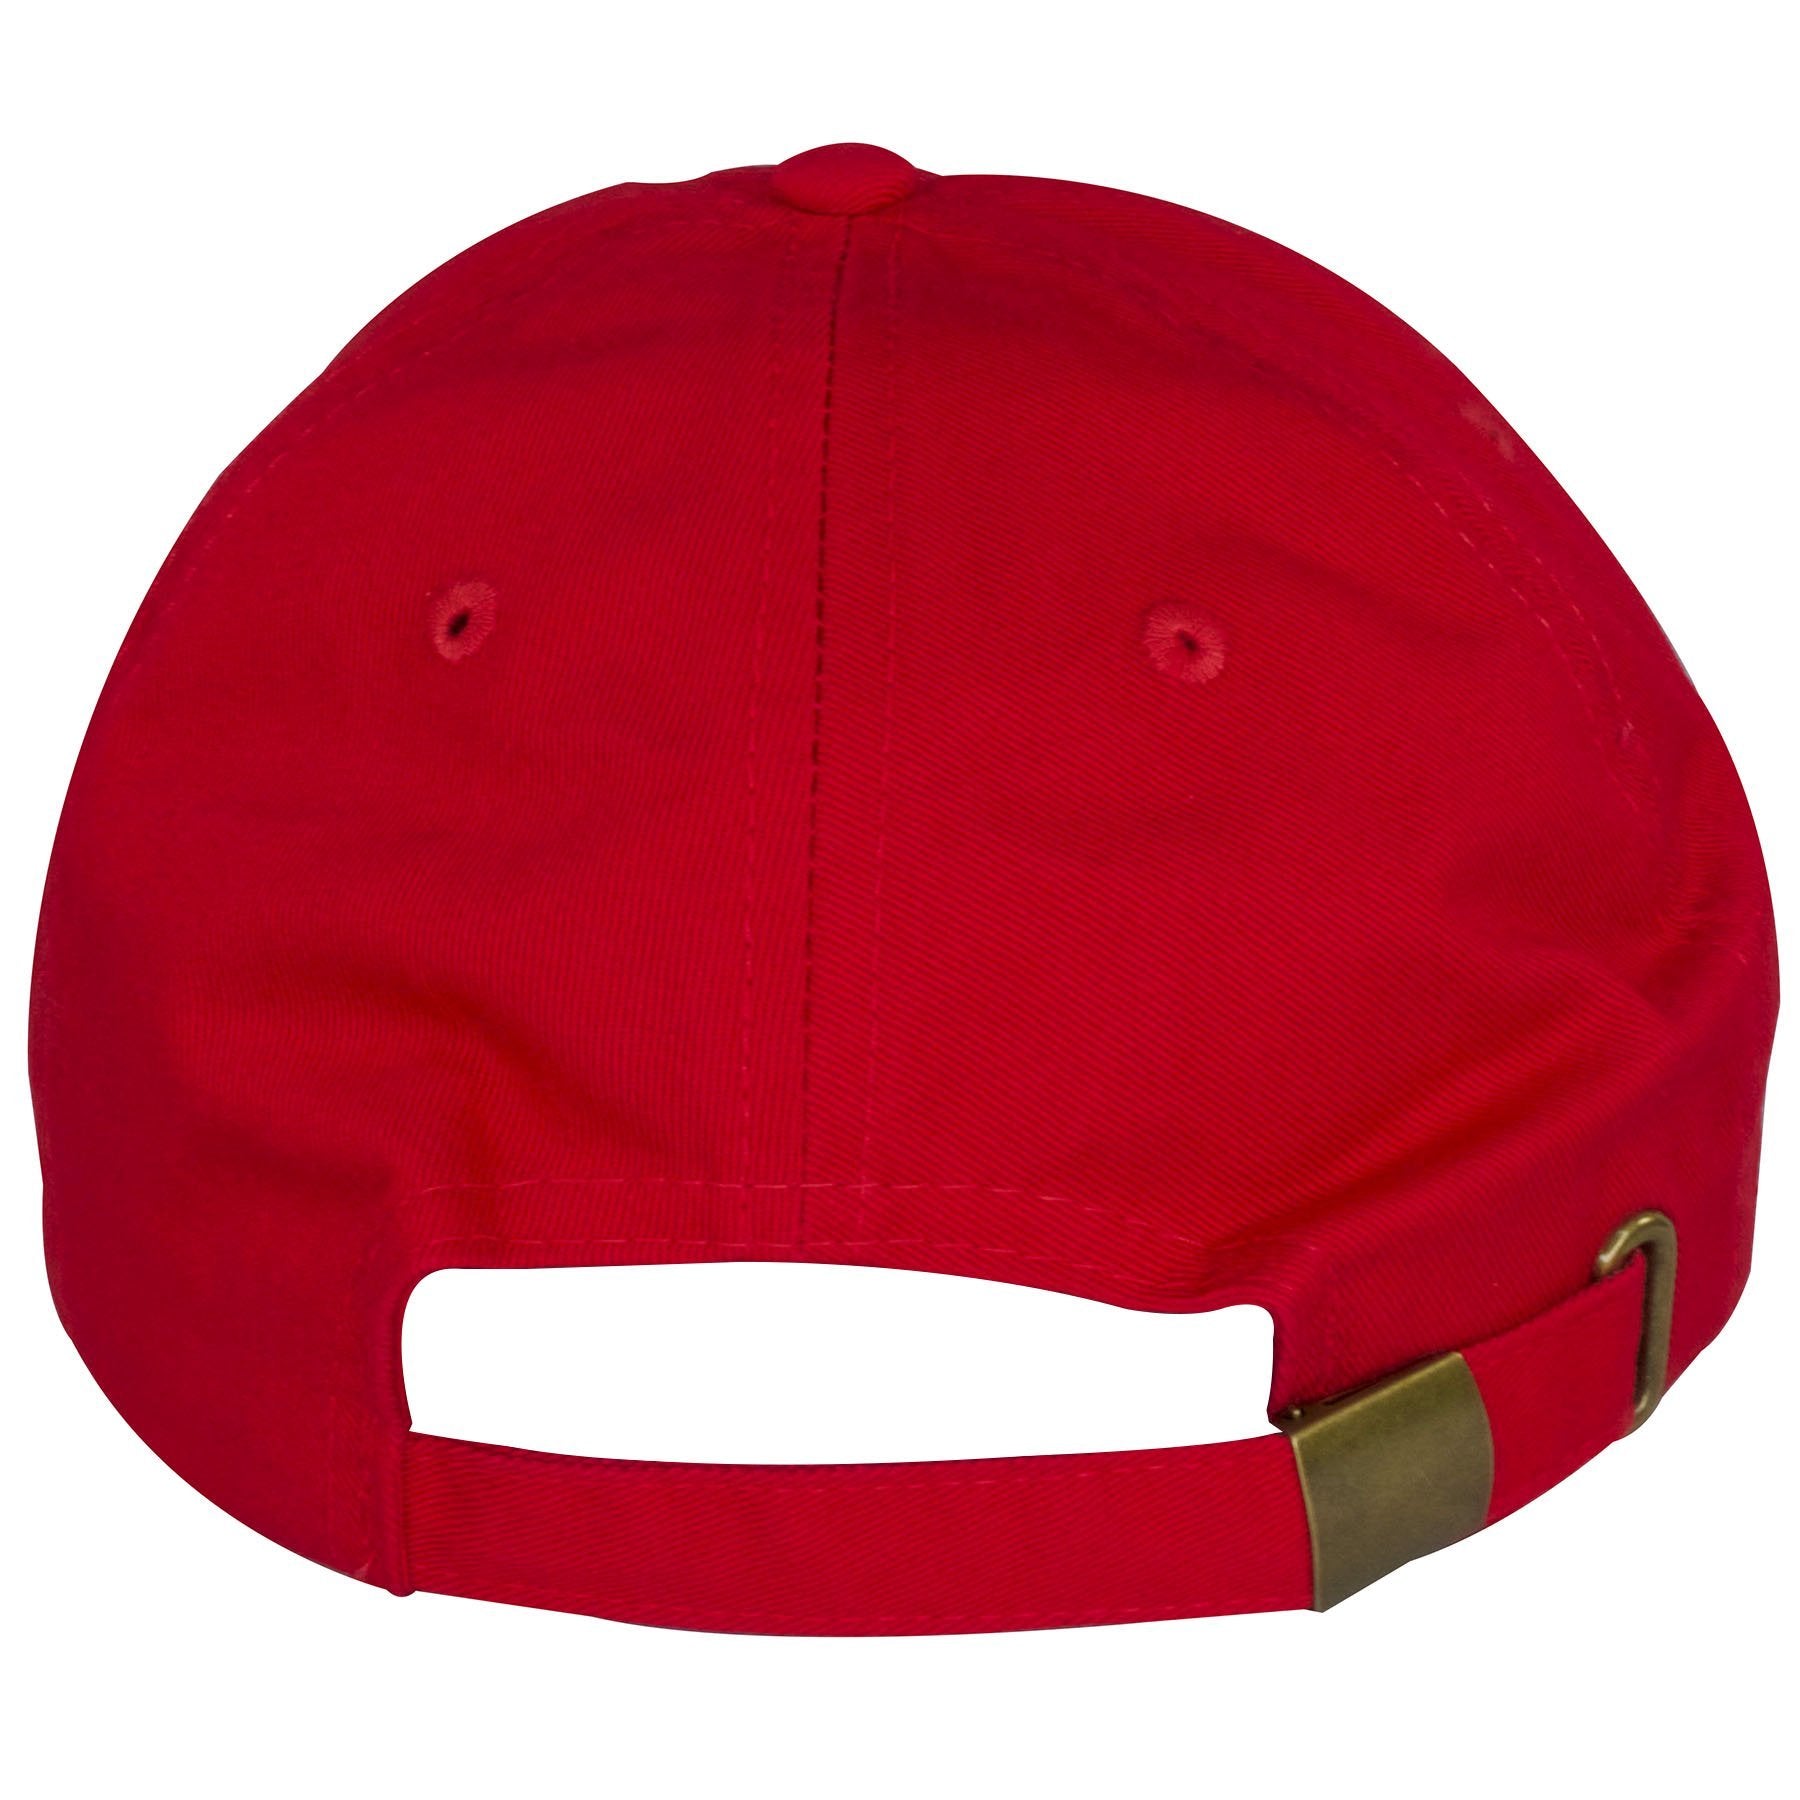 The back of this Jordan 11 96 Red Hat shows an adjustable red buckle strap.